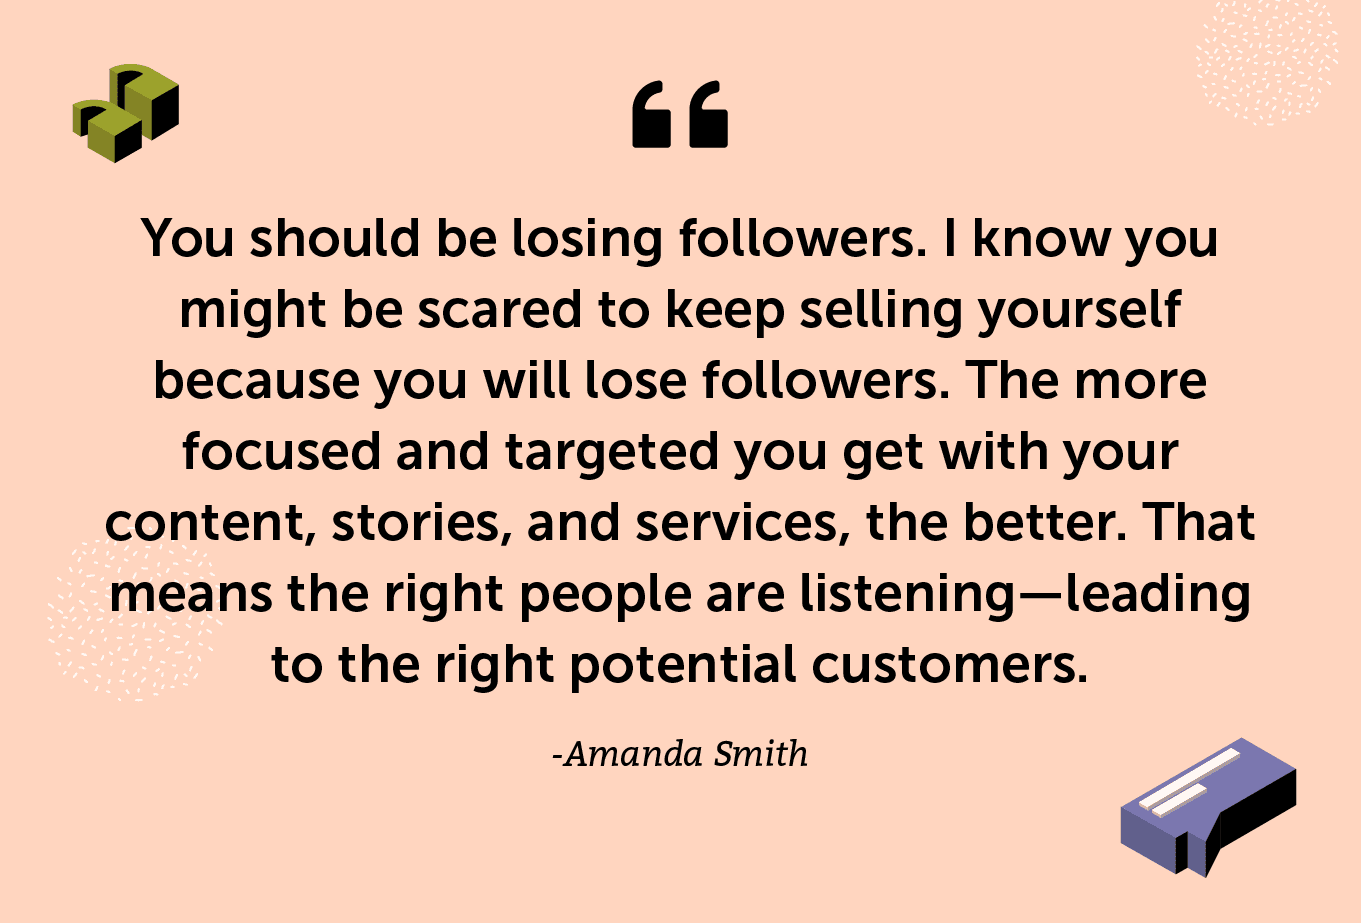 "You should be losing followers. I know you might be scared to keep selling yourself because you will lose followers. The more focused and targeted you get with your content, stories, and services, the better. That means the right people are listening—leading to the right potential customers."  -Amanda Smith